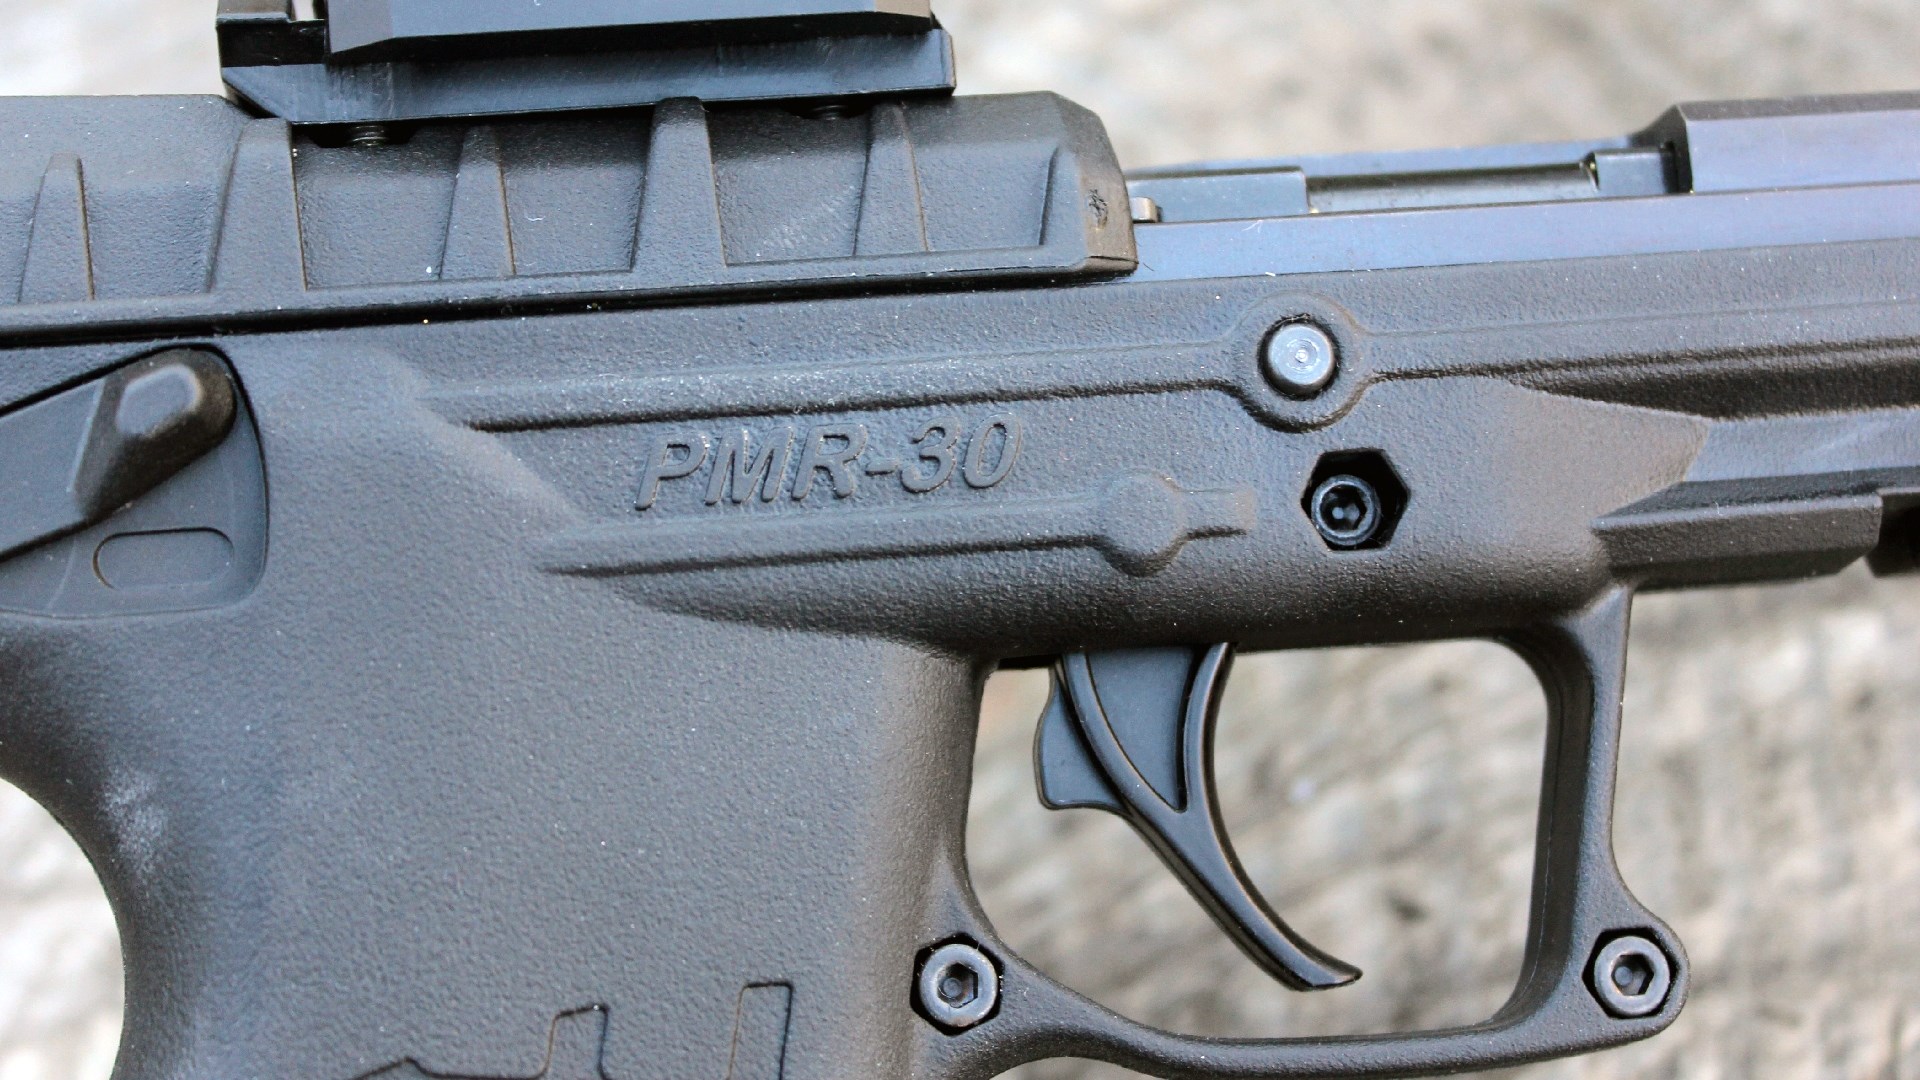 Keltec PMR-30 pistol handgun rimfire semi-automatic close-up image of stamp on right side of frame above trigger forward of safety lever below red-dot sight optic